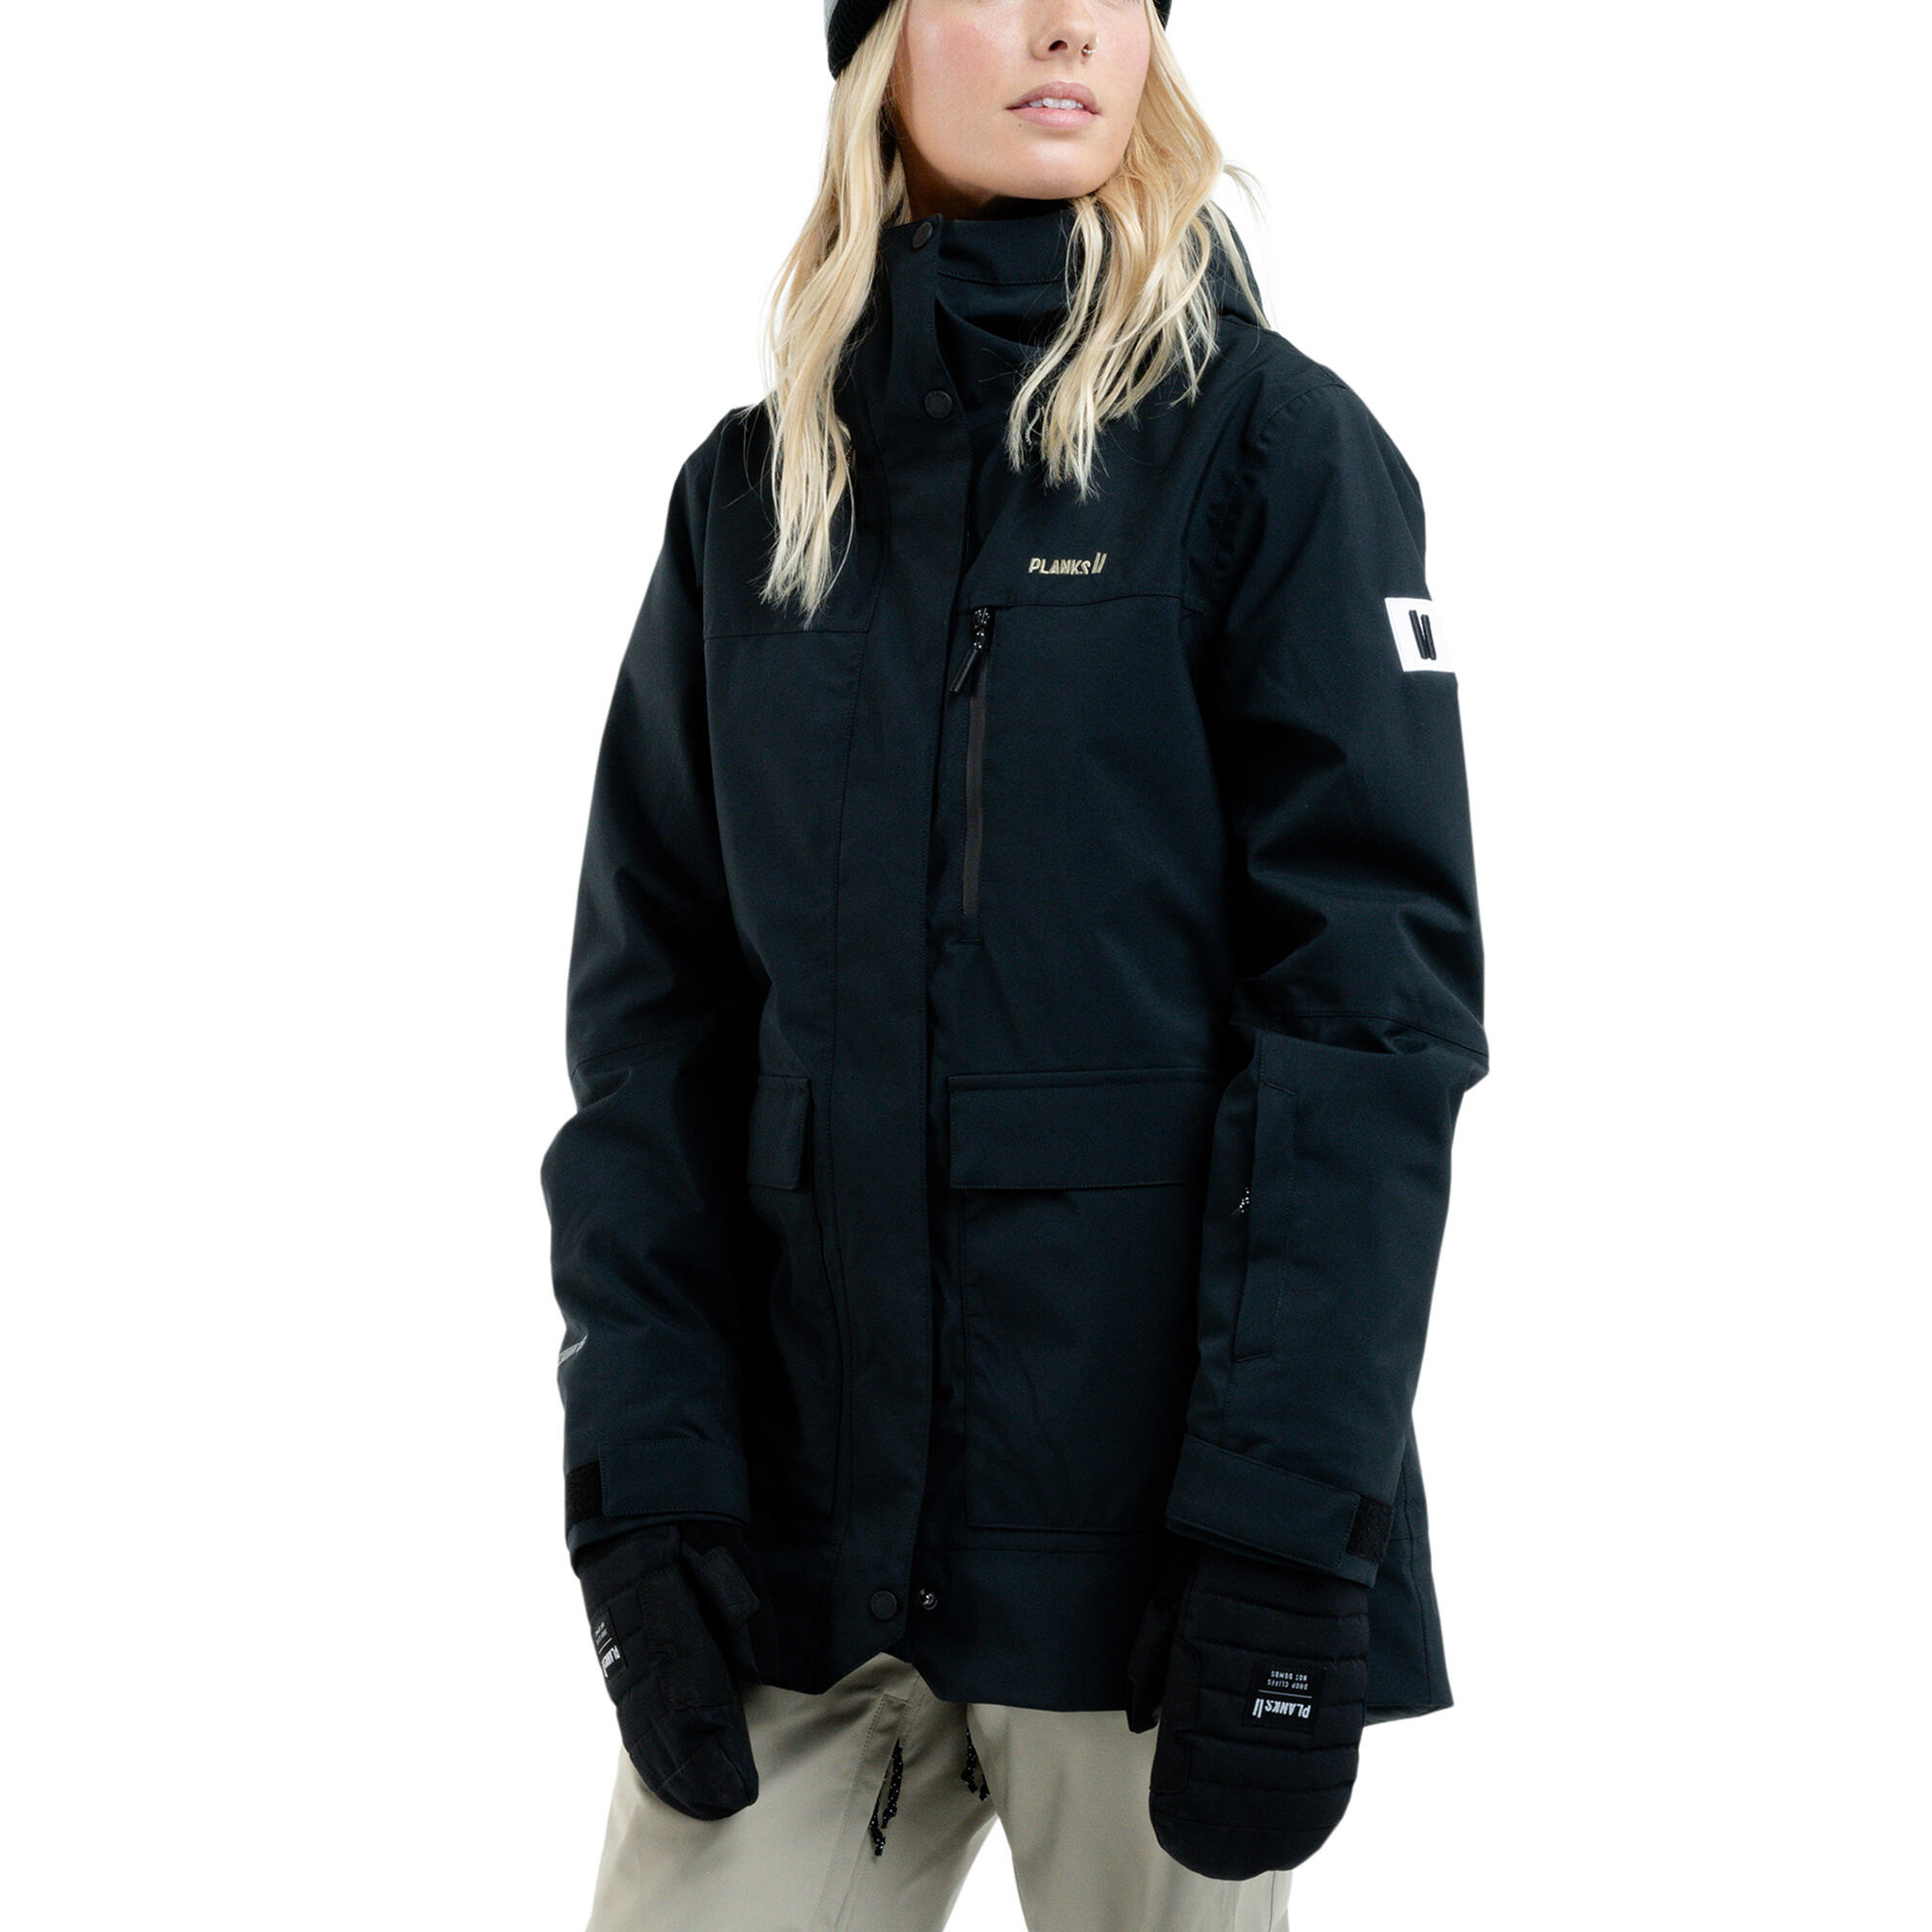 PLANKS Planks All-Time Women's Insulated Ski Jacket in Black Ladies Hooded Snow Coat